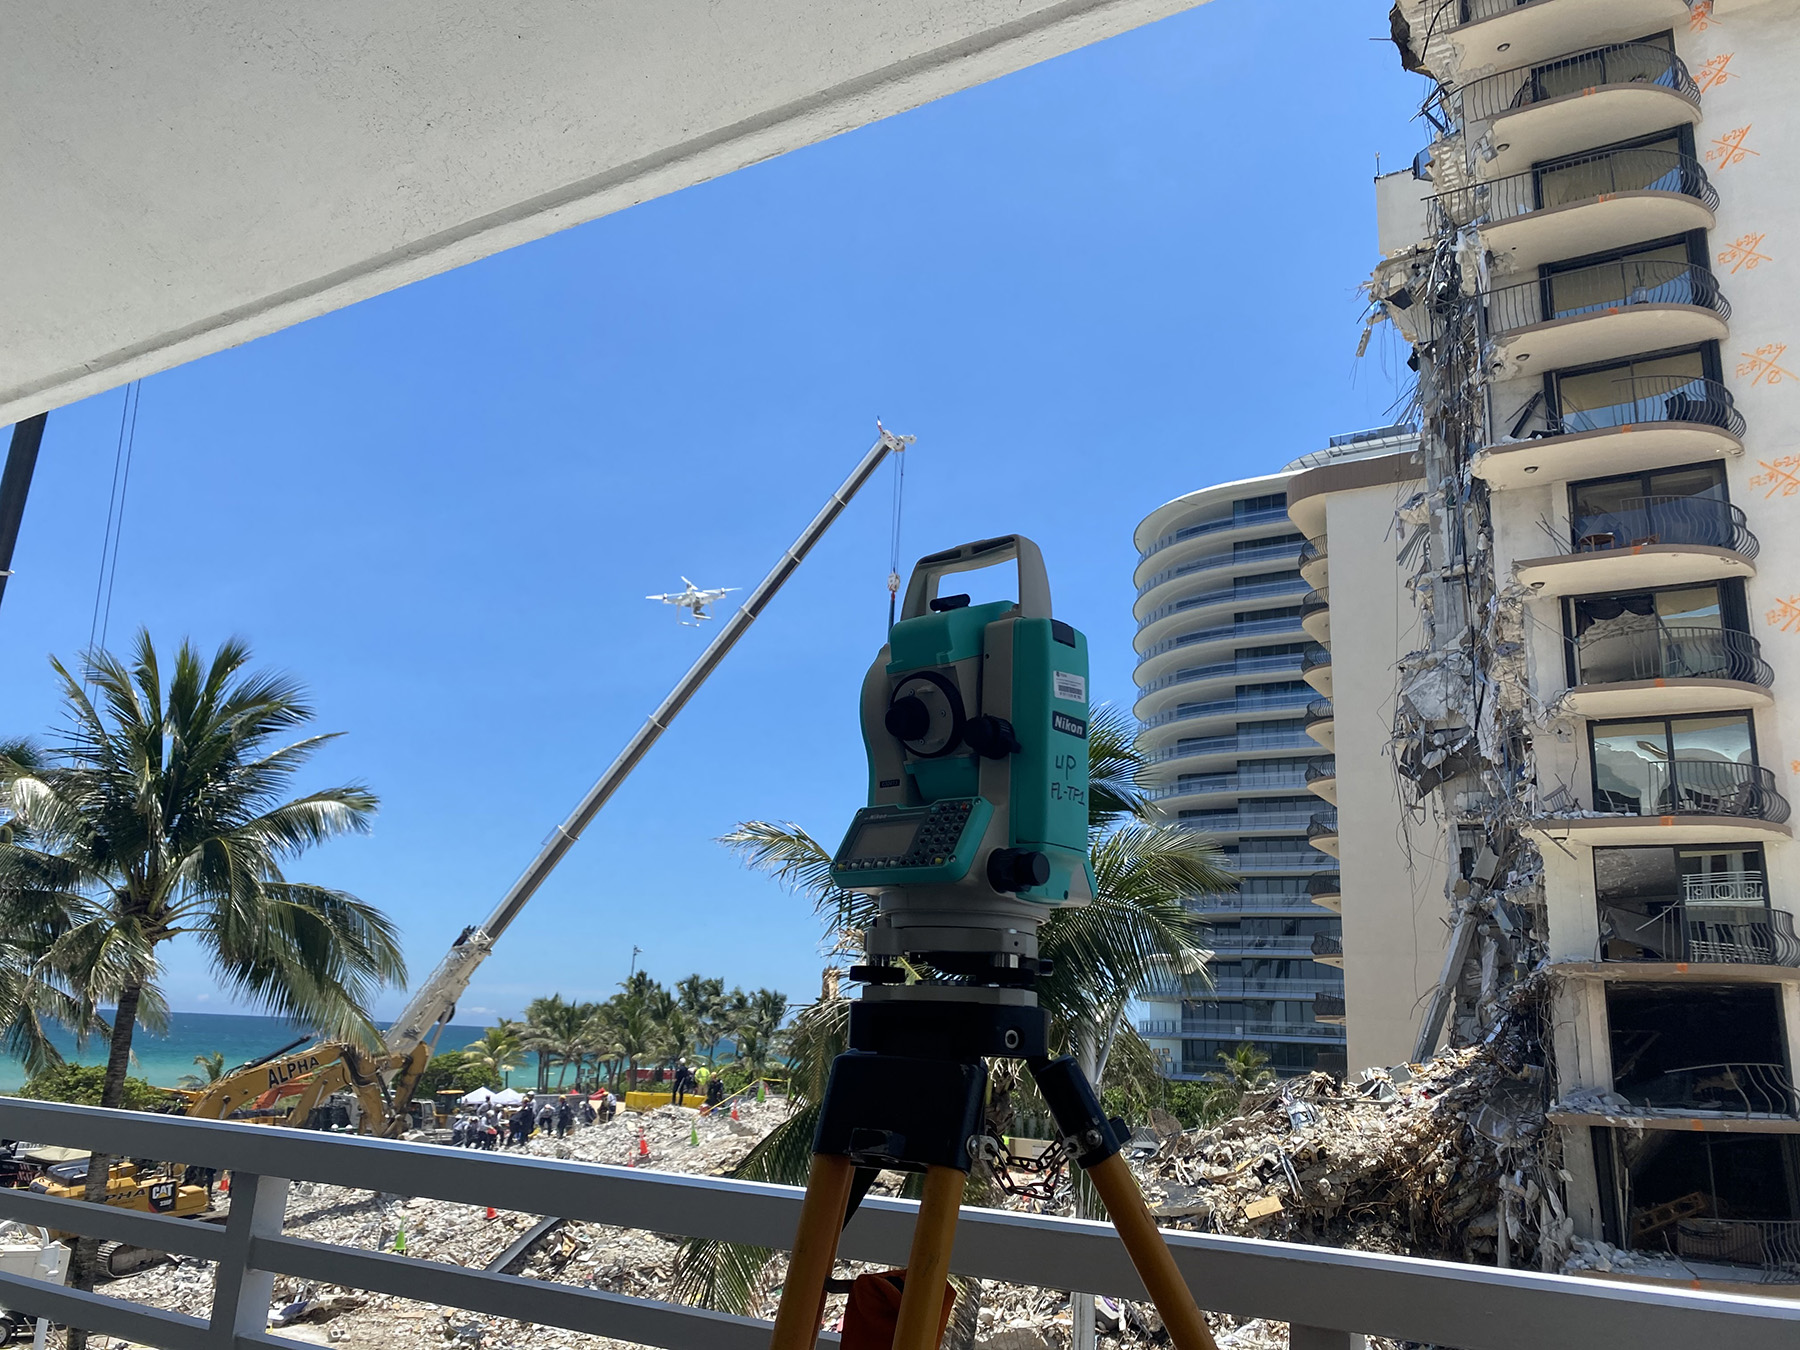 In the foreground, a turquoise survey telescope standing on four legs. In the background, a partially collapsed building to the left, and people standing on rubble to the right. Adjacent the rubble are palm trees and the Atlantic Ocean. 